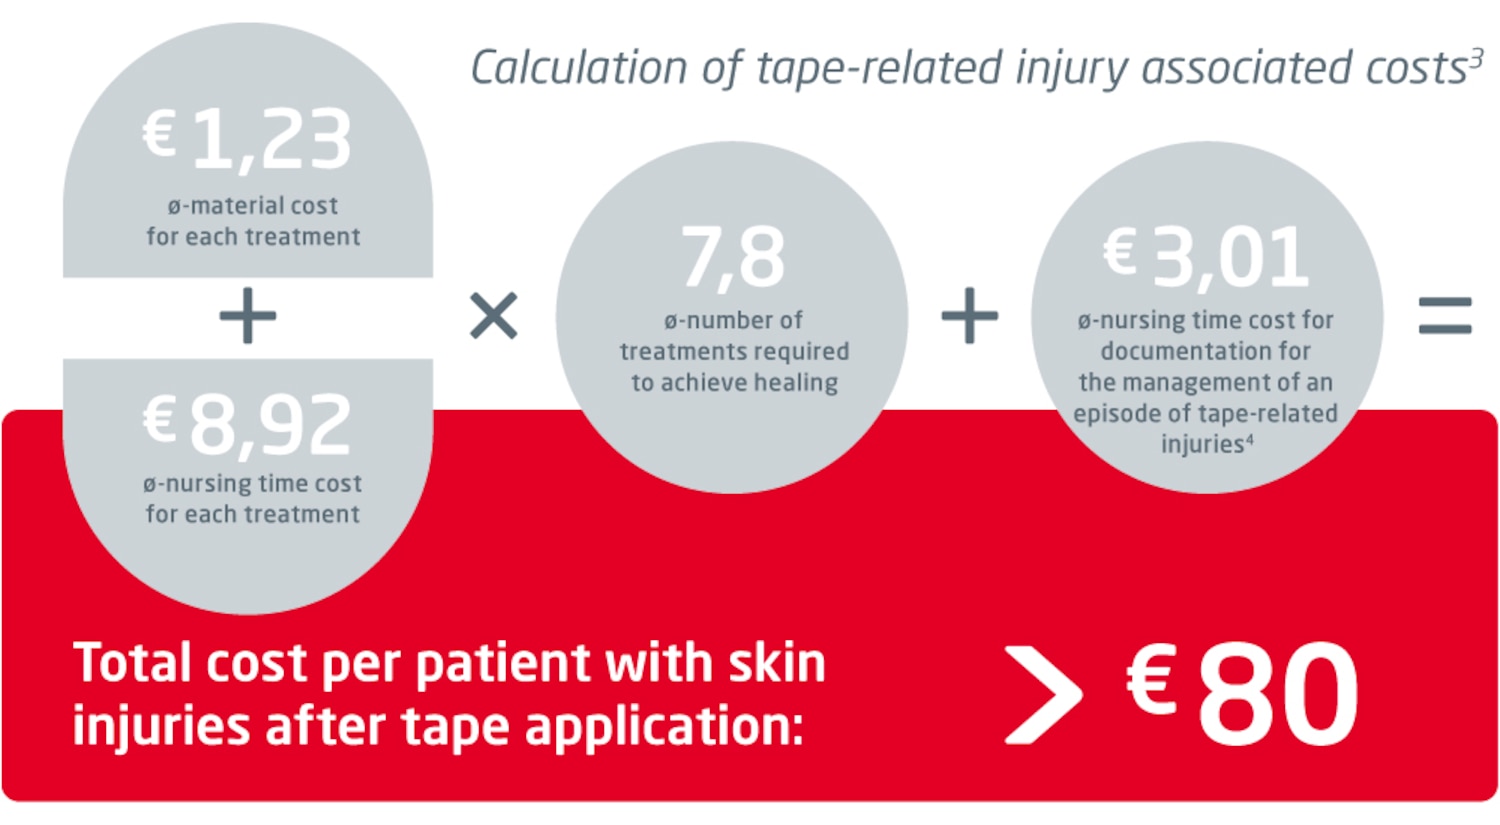 Illustration showing the calculation of tape-related injury associated costs.